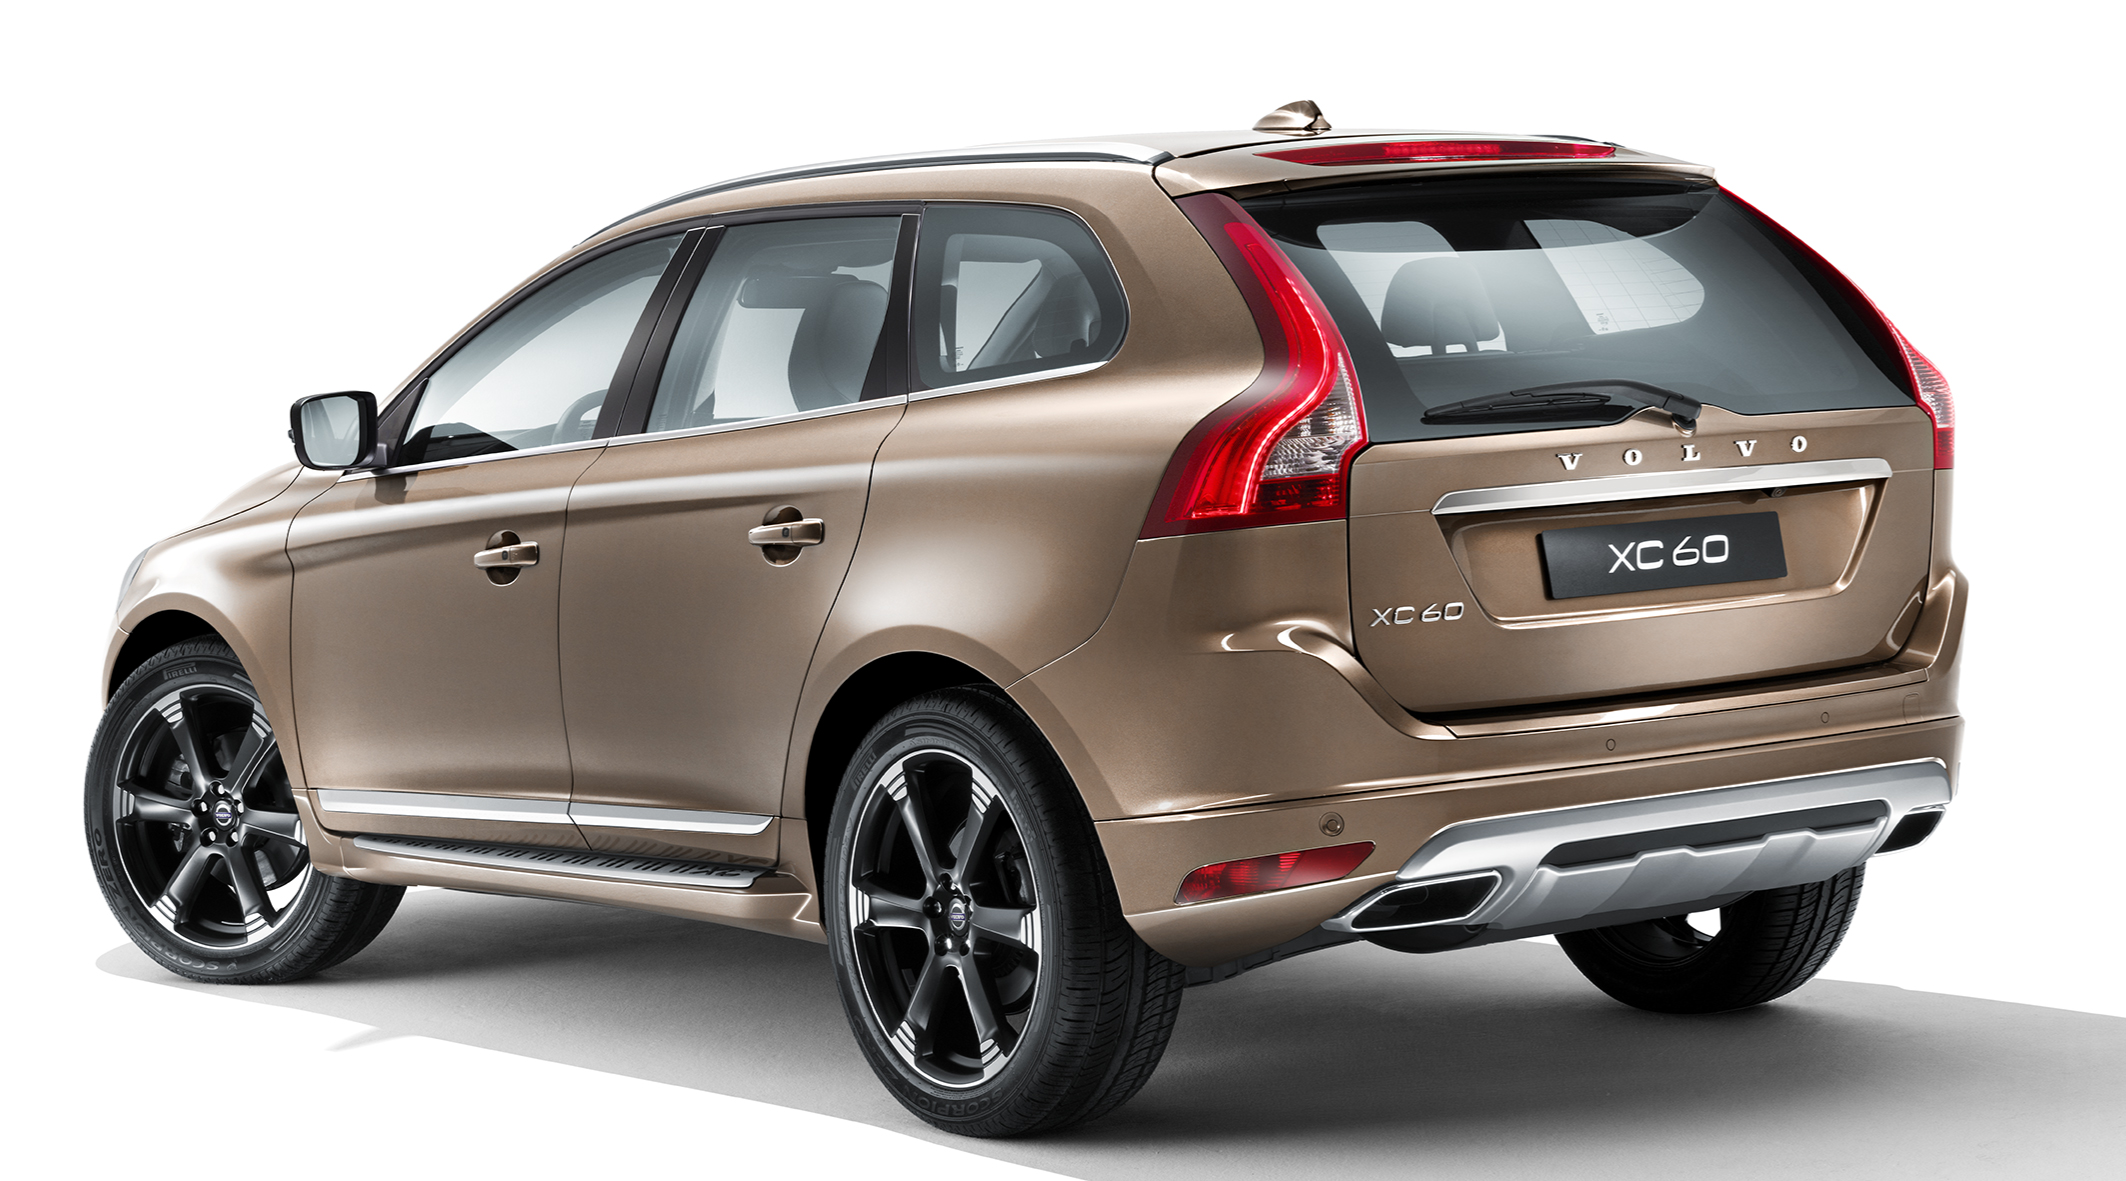 Peep Latterlig Blive gift Accessories - XC60 2017 - Volvo Cars Accessories